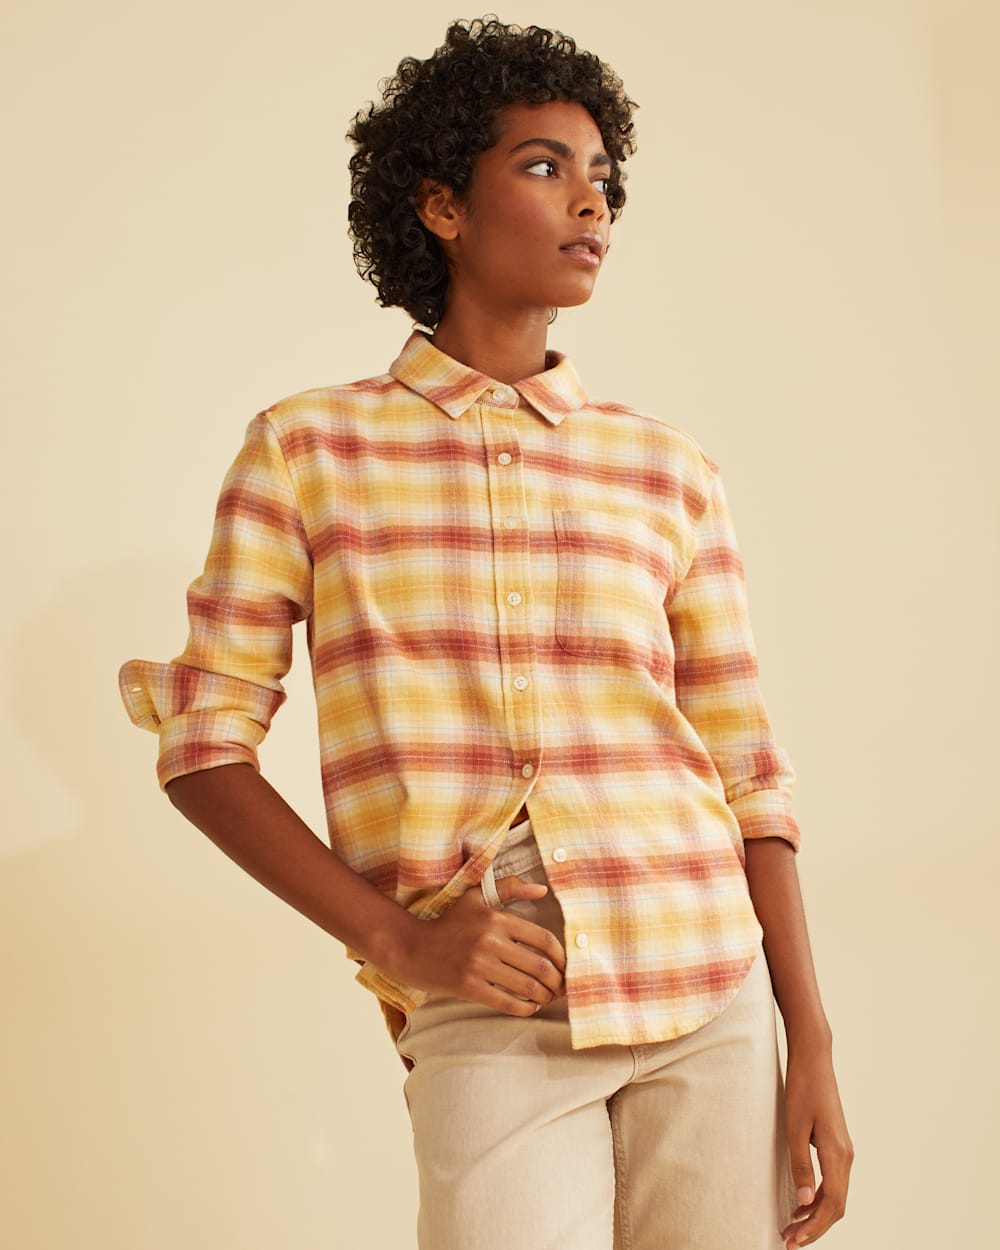 ALTERNATE VIEW OF WOMEN'S BOYFRIEND DOUBLE-BRUSHED FLANNEL SHIRT IN SAHARA SAND/REDWOOD PLAID image number 6